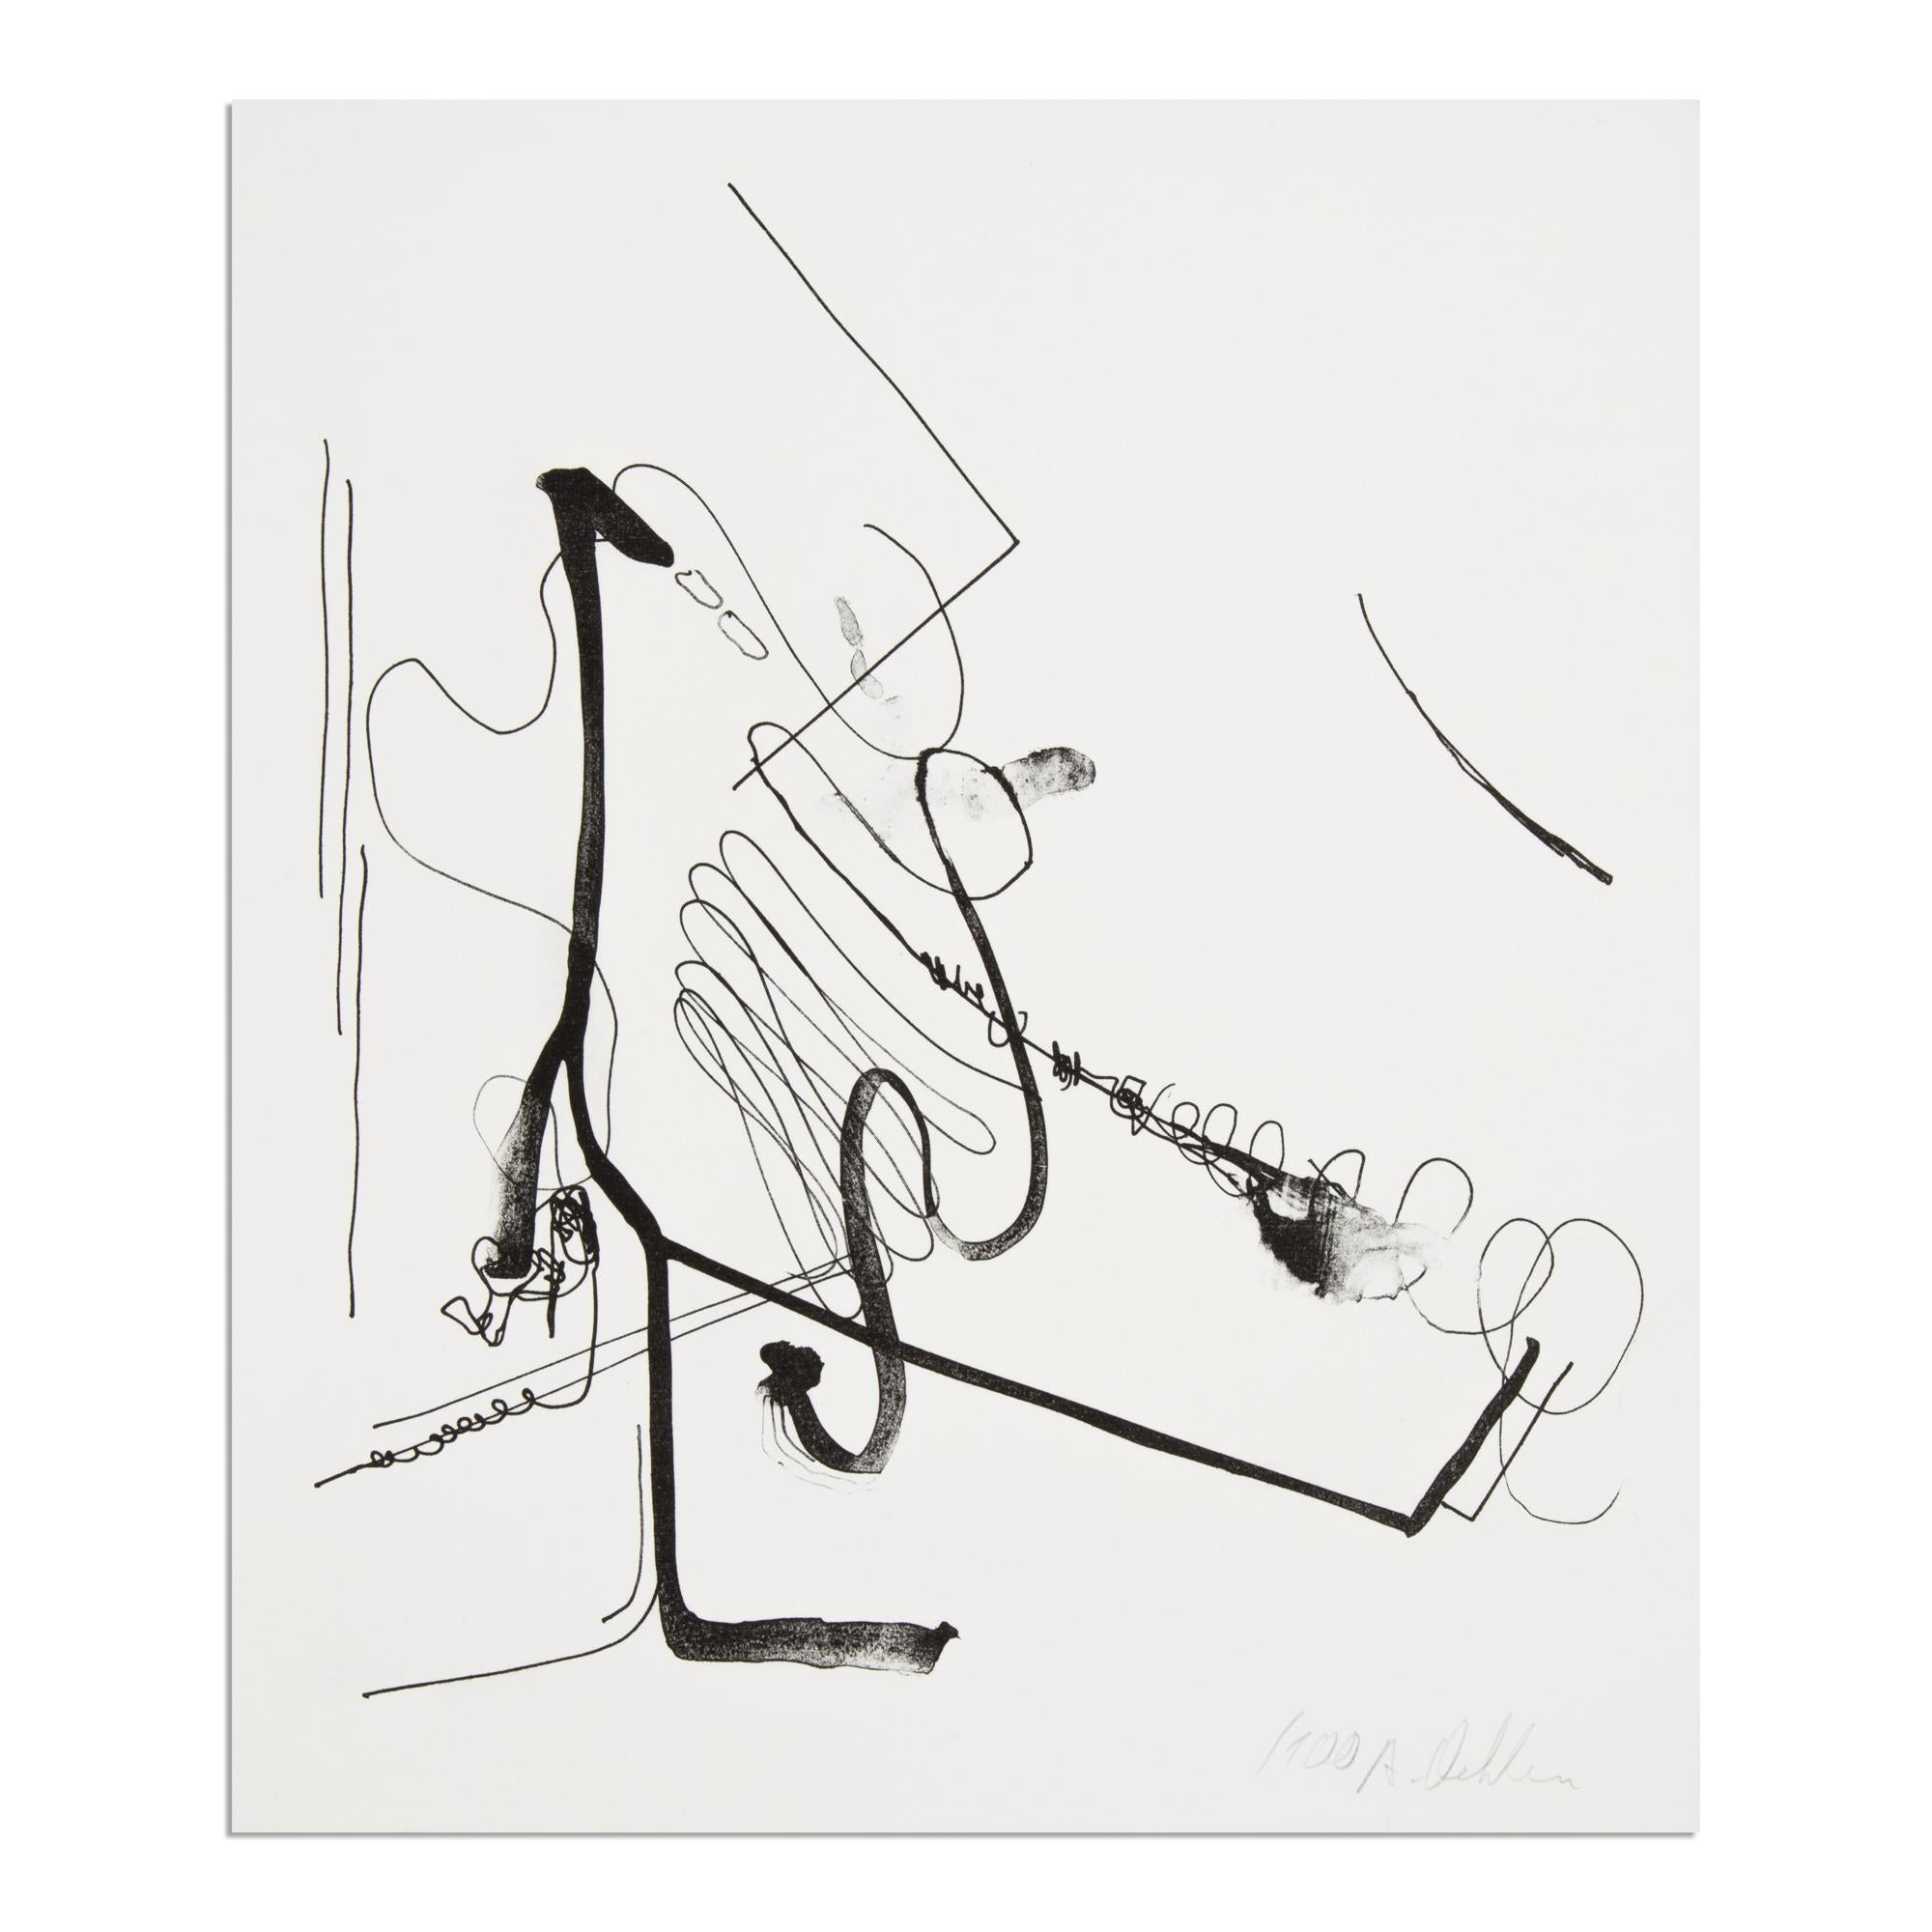 Albert Oehlen (German, b. 1954)
Meditation über Bürokratische Tendenzen bei TzK, 2020
Medium: Lithograph on paper
Dimensions: 36.2 × 30.6 cm (14 3/10 × 12 in)
Edition of 100: Hand signed and numbered
Condition: Mint